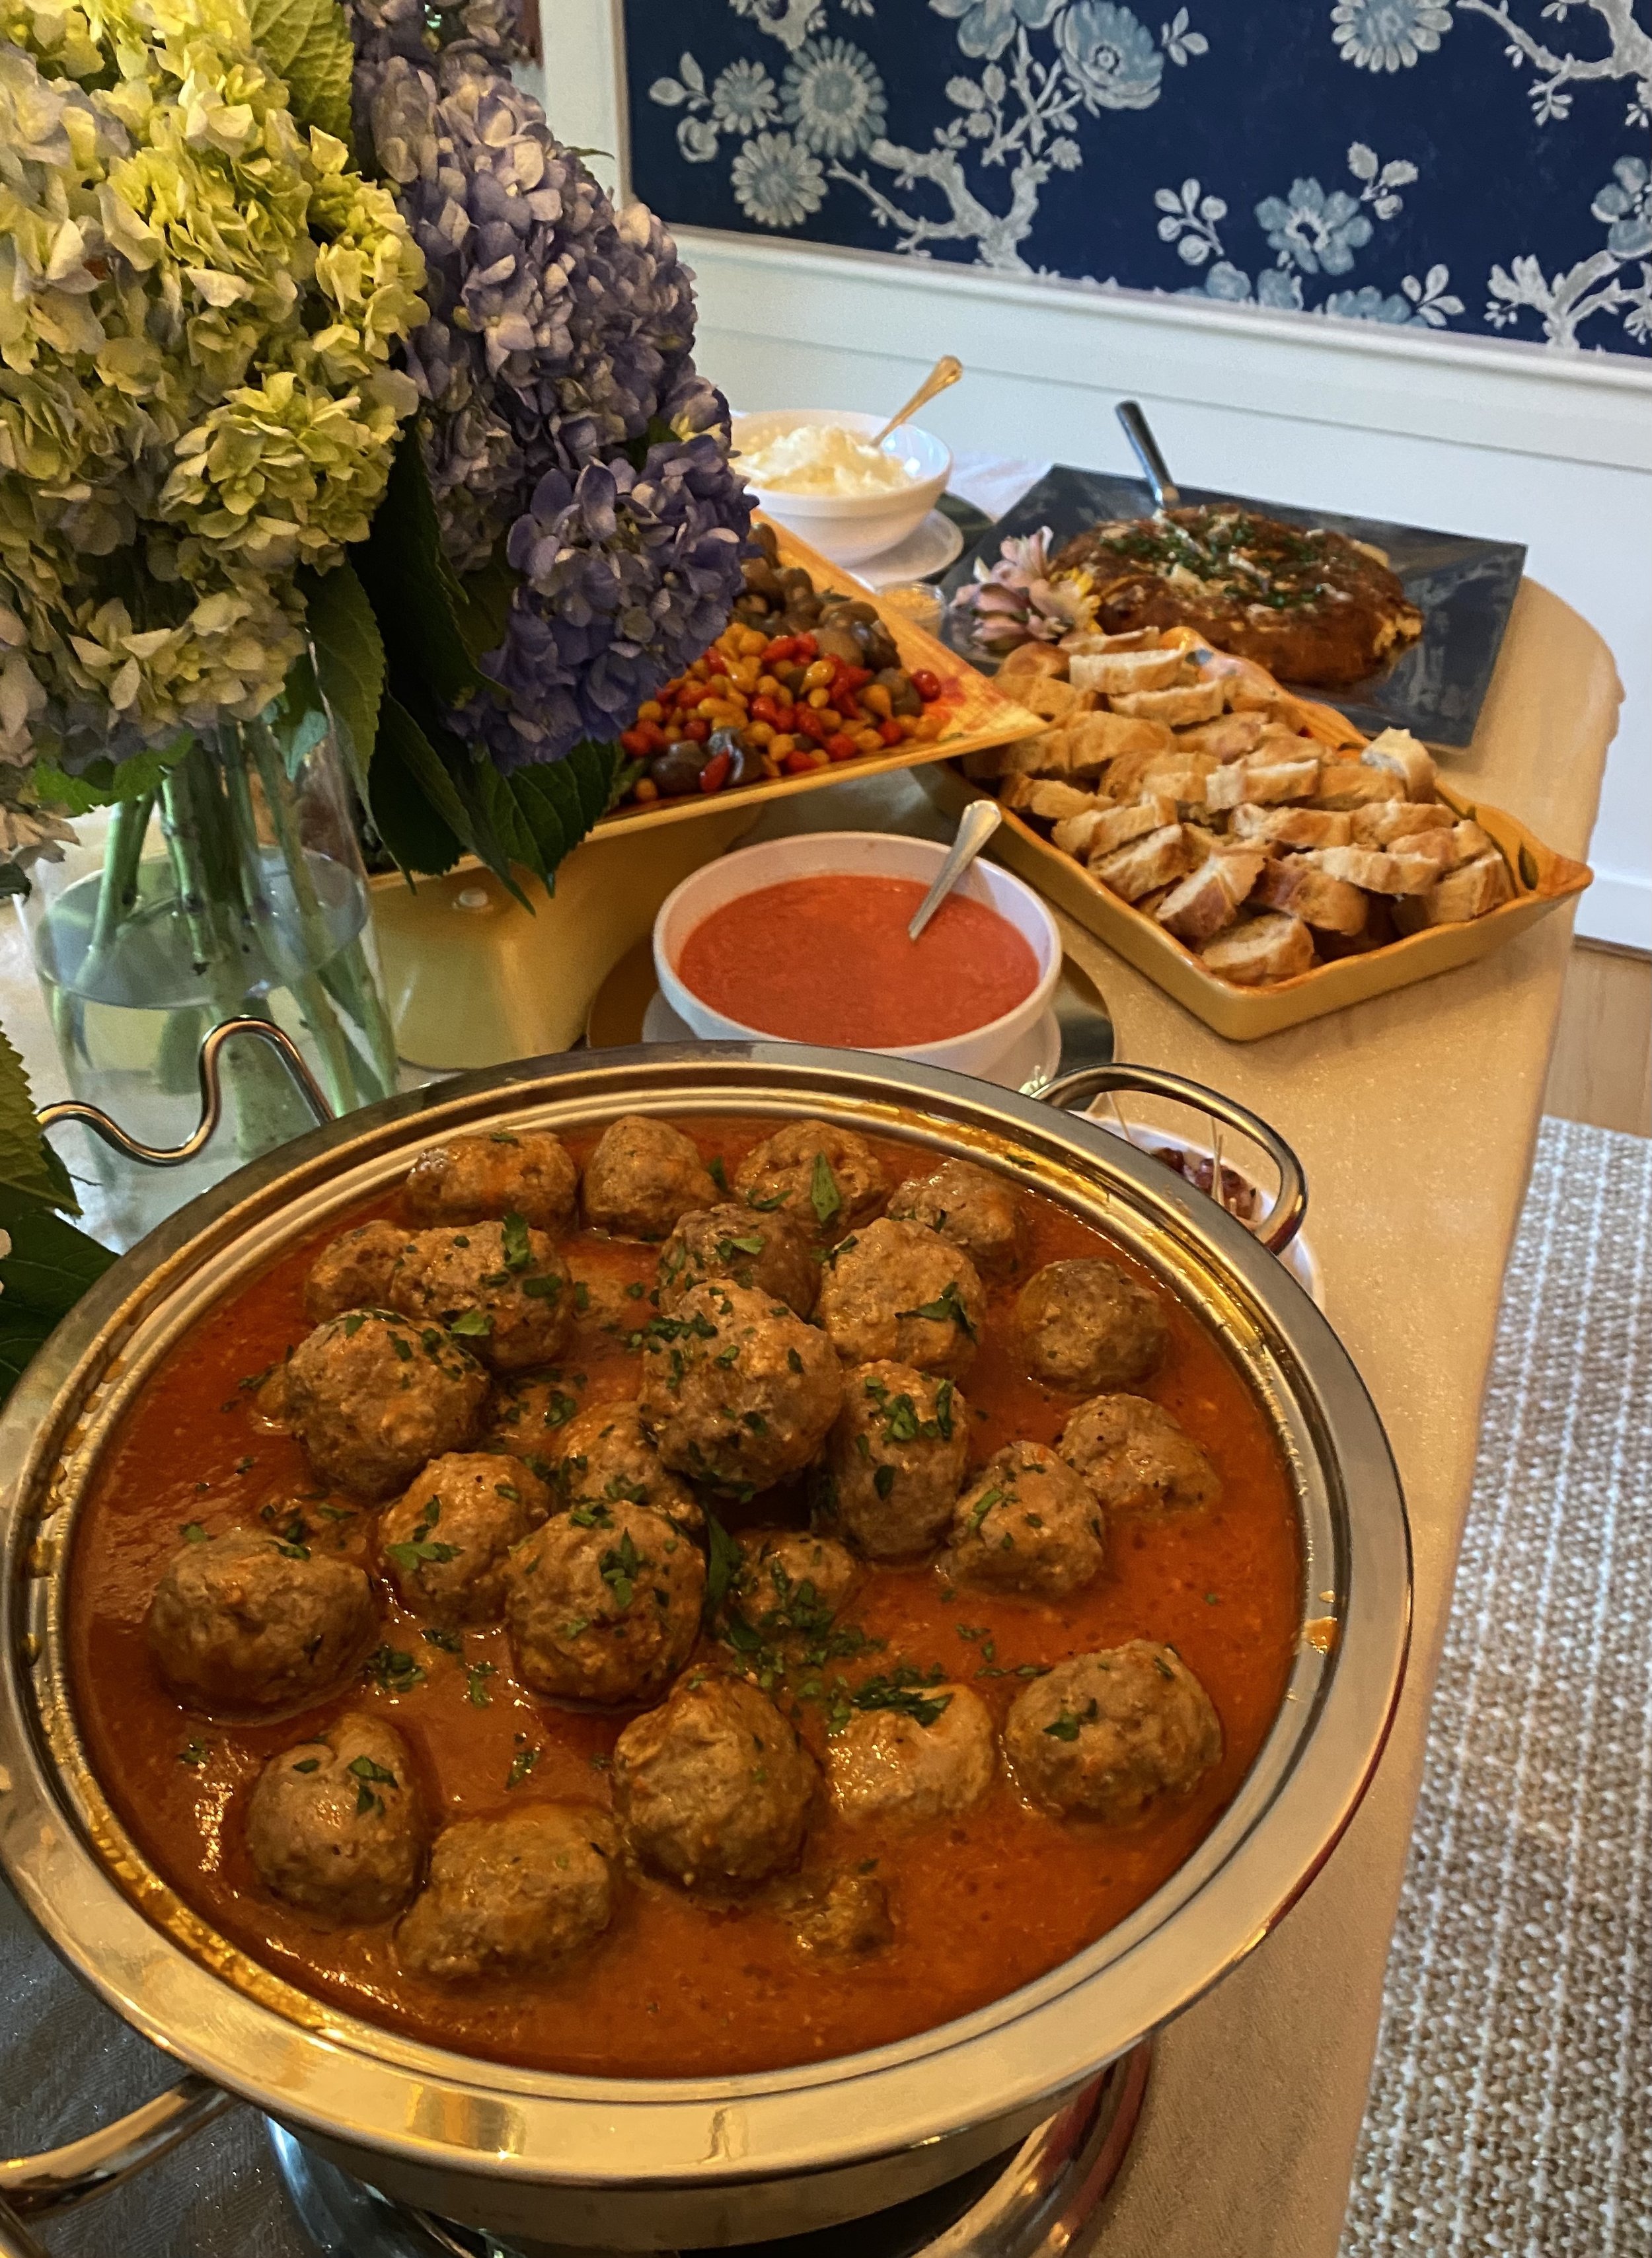 Gourmet Healthy-Eating Delight: Meatballs by Eden Healthy Private Catering